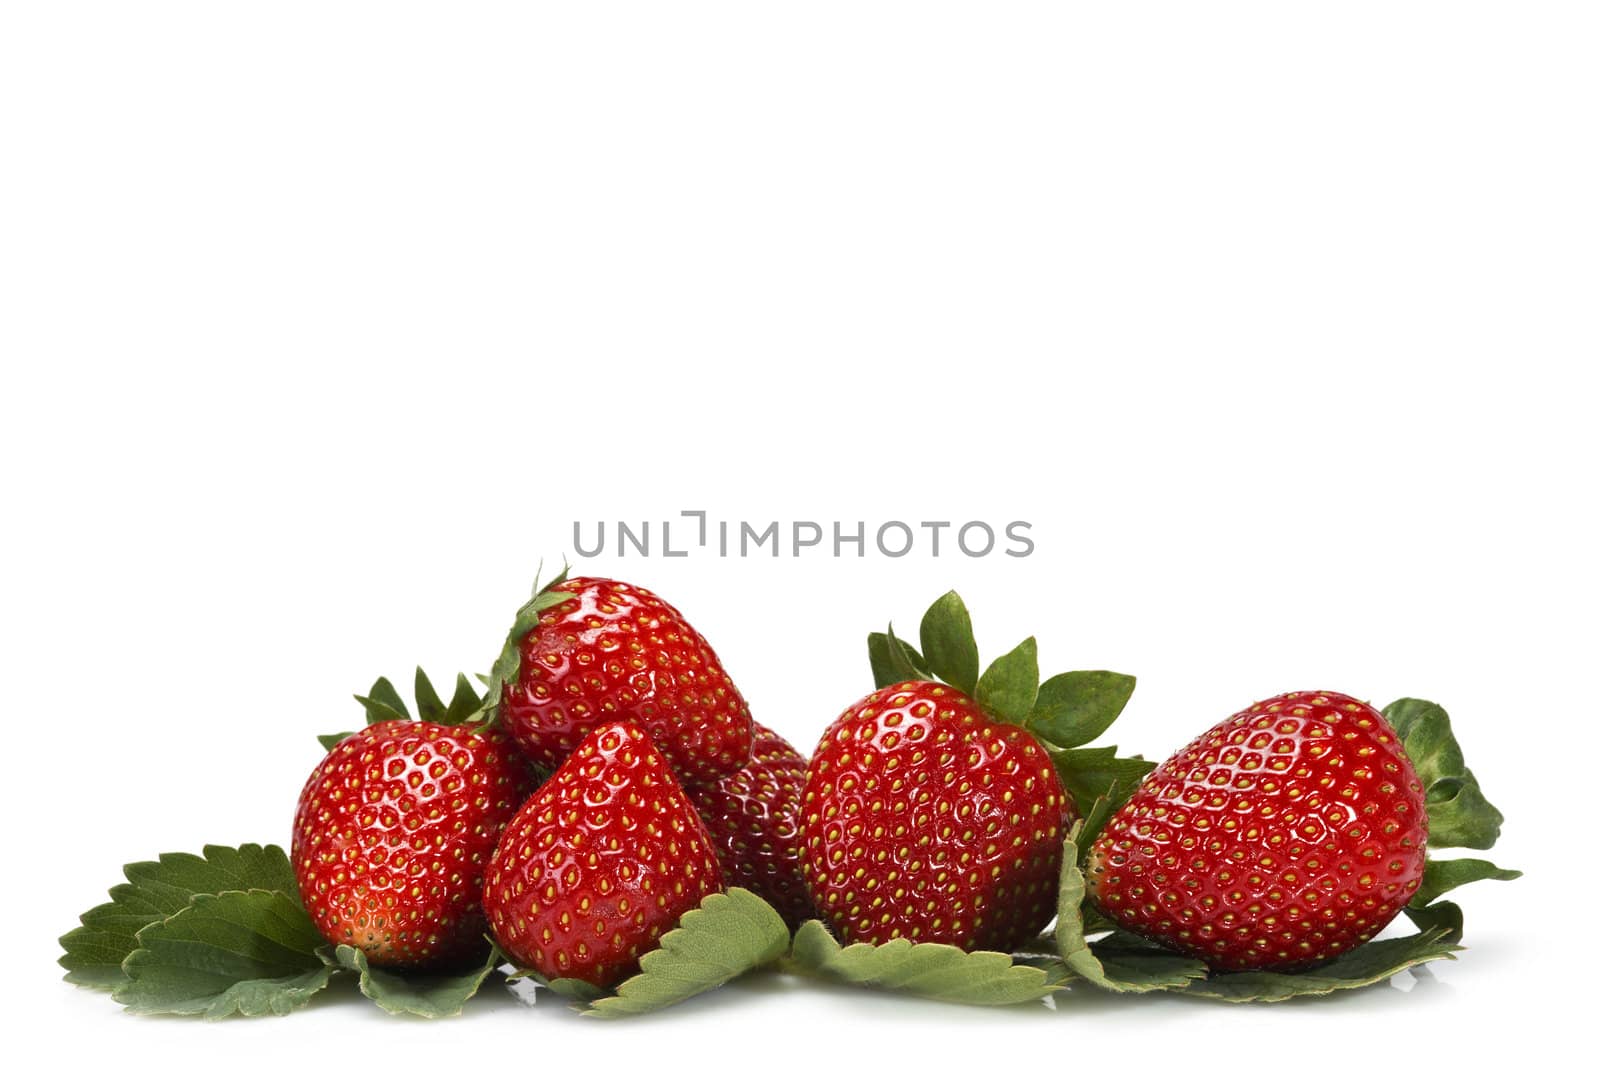 Strawberries and their leaves. by angelsimon